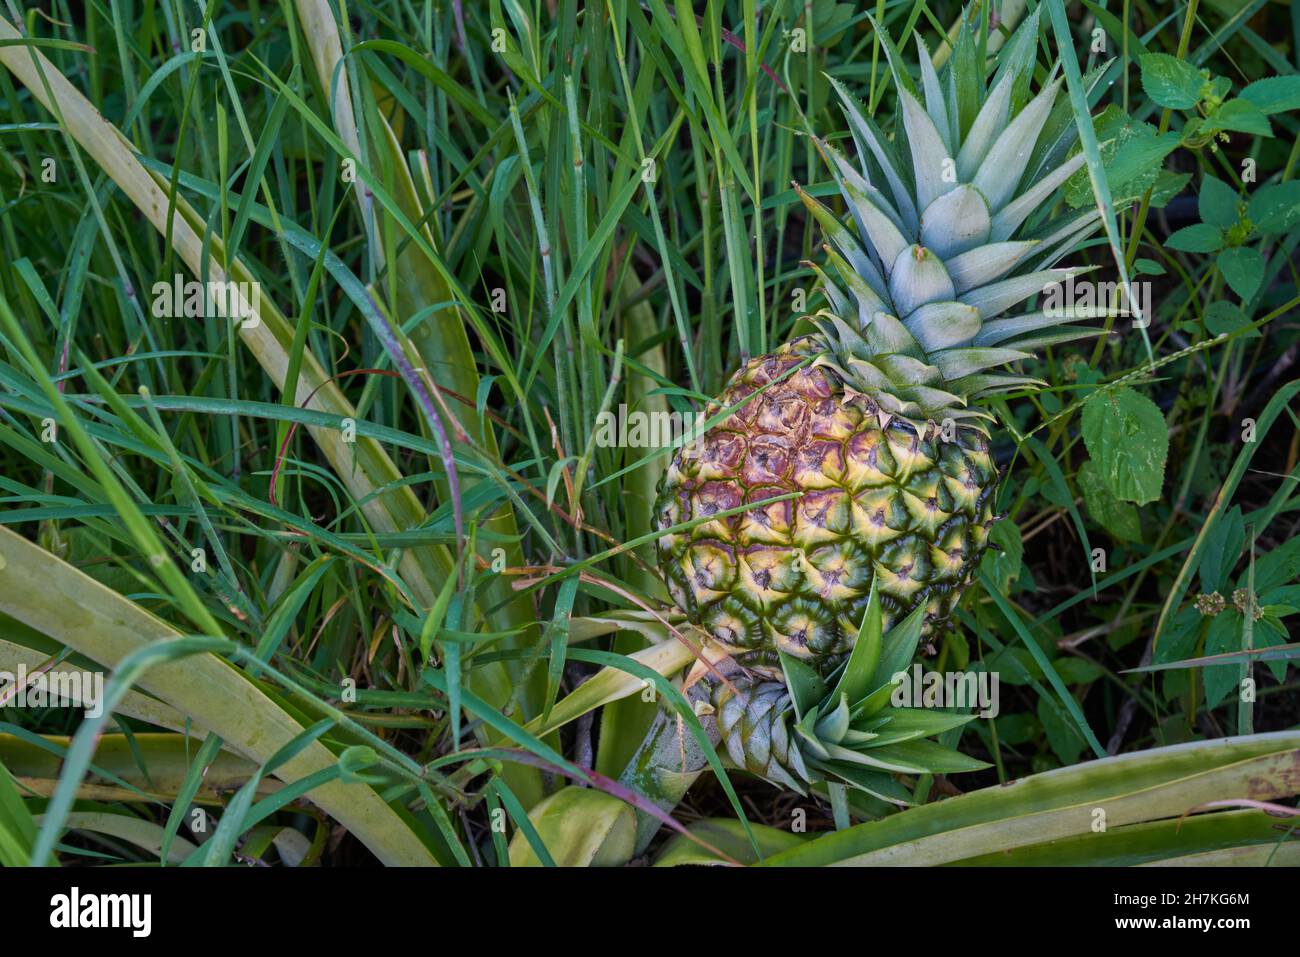 Pineapple plantation ready to cut and enjoy with green grass Stock Photo